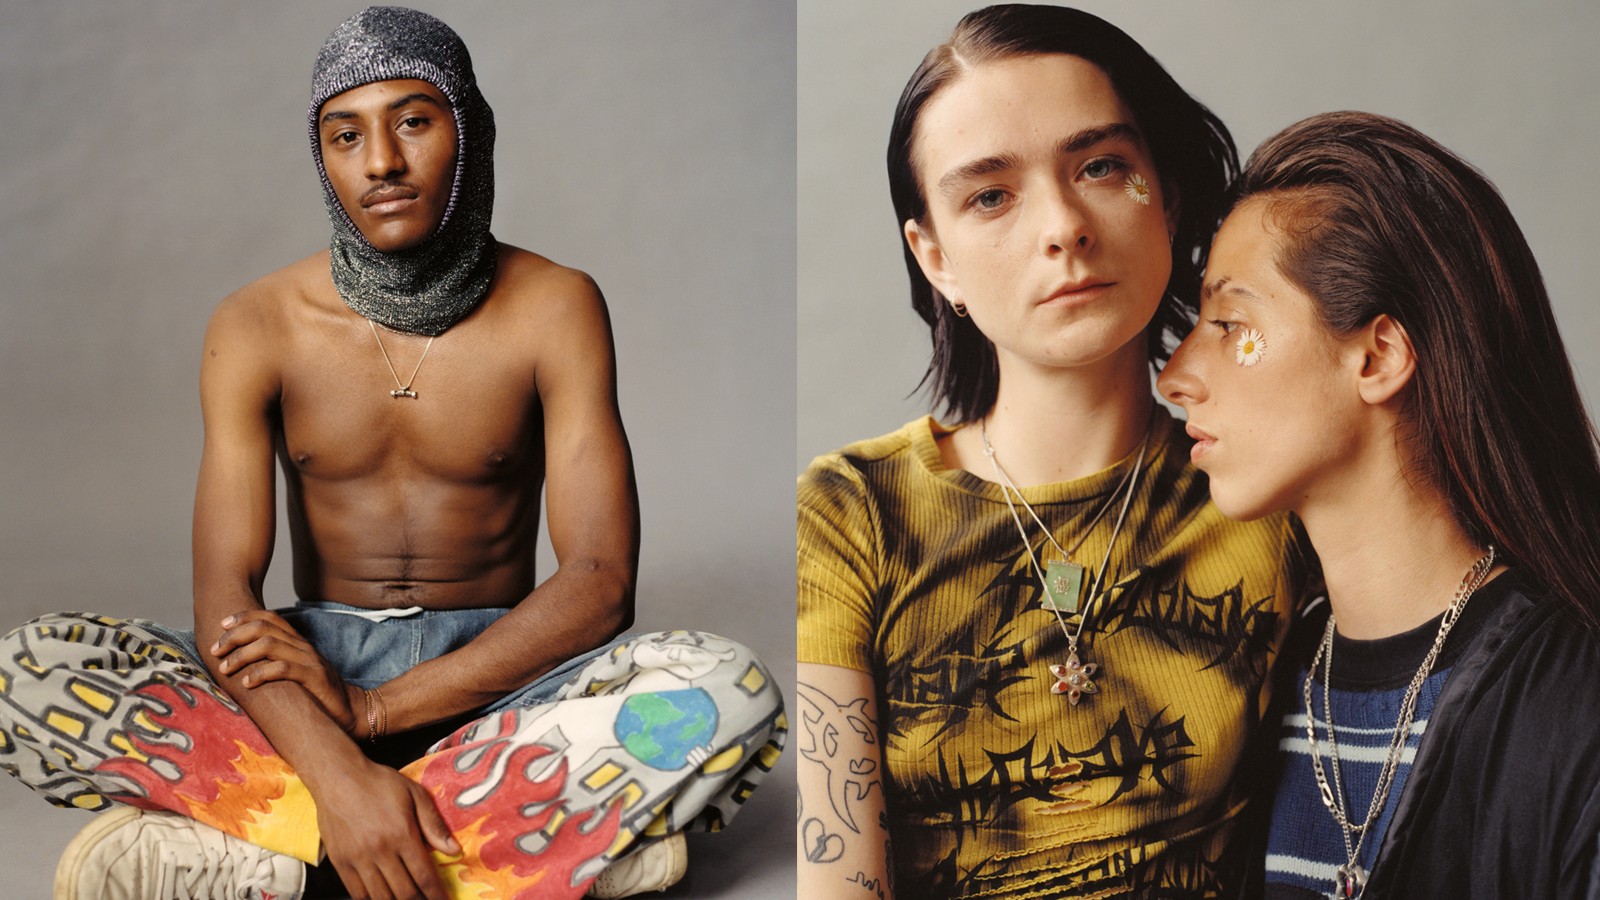 See How Skateboarding Is Infiltrating Fashion With Our Spring 2019  Photoshoot - FASHION Magazine